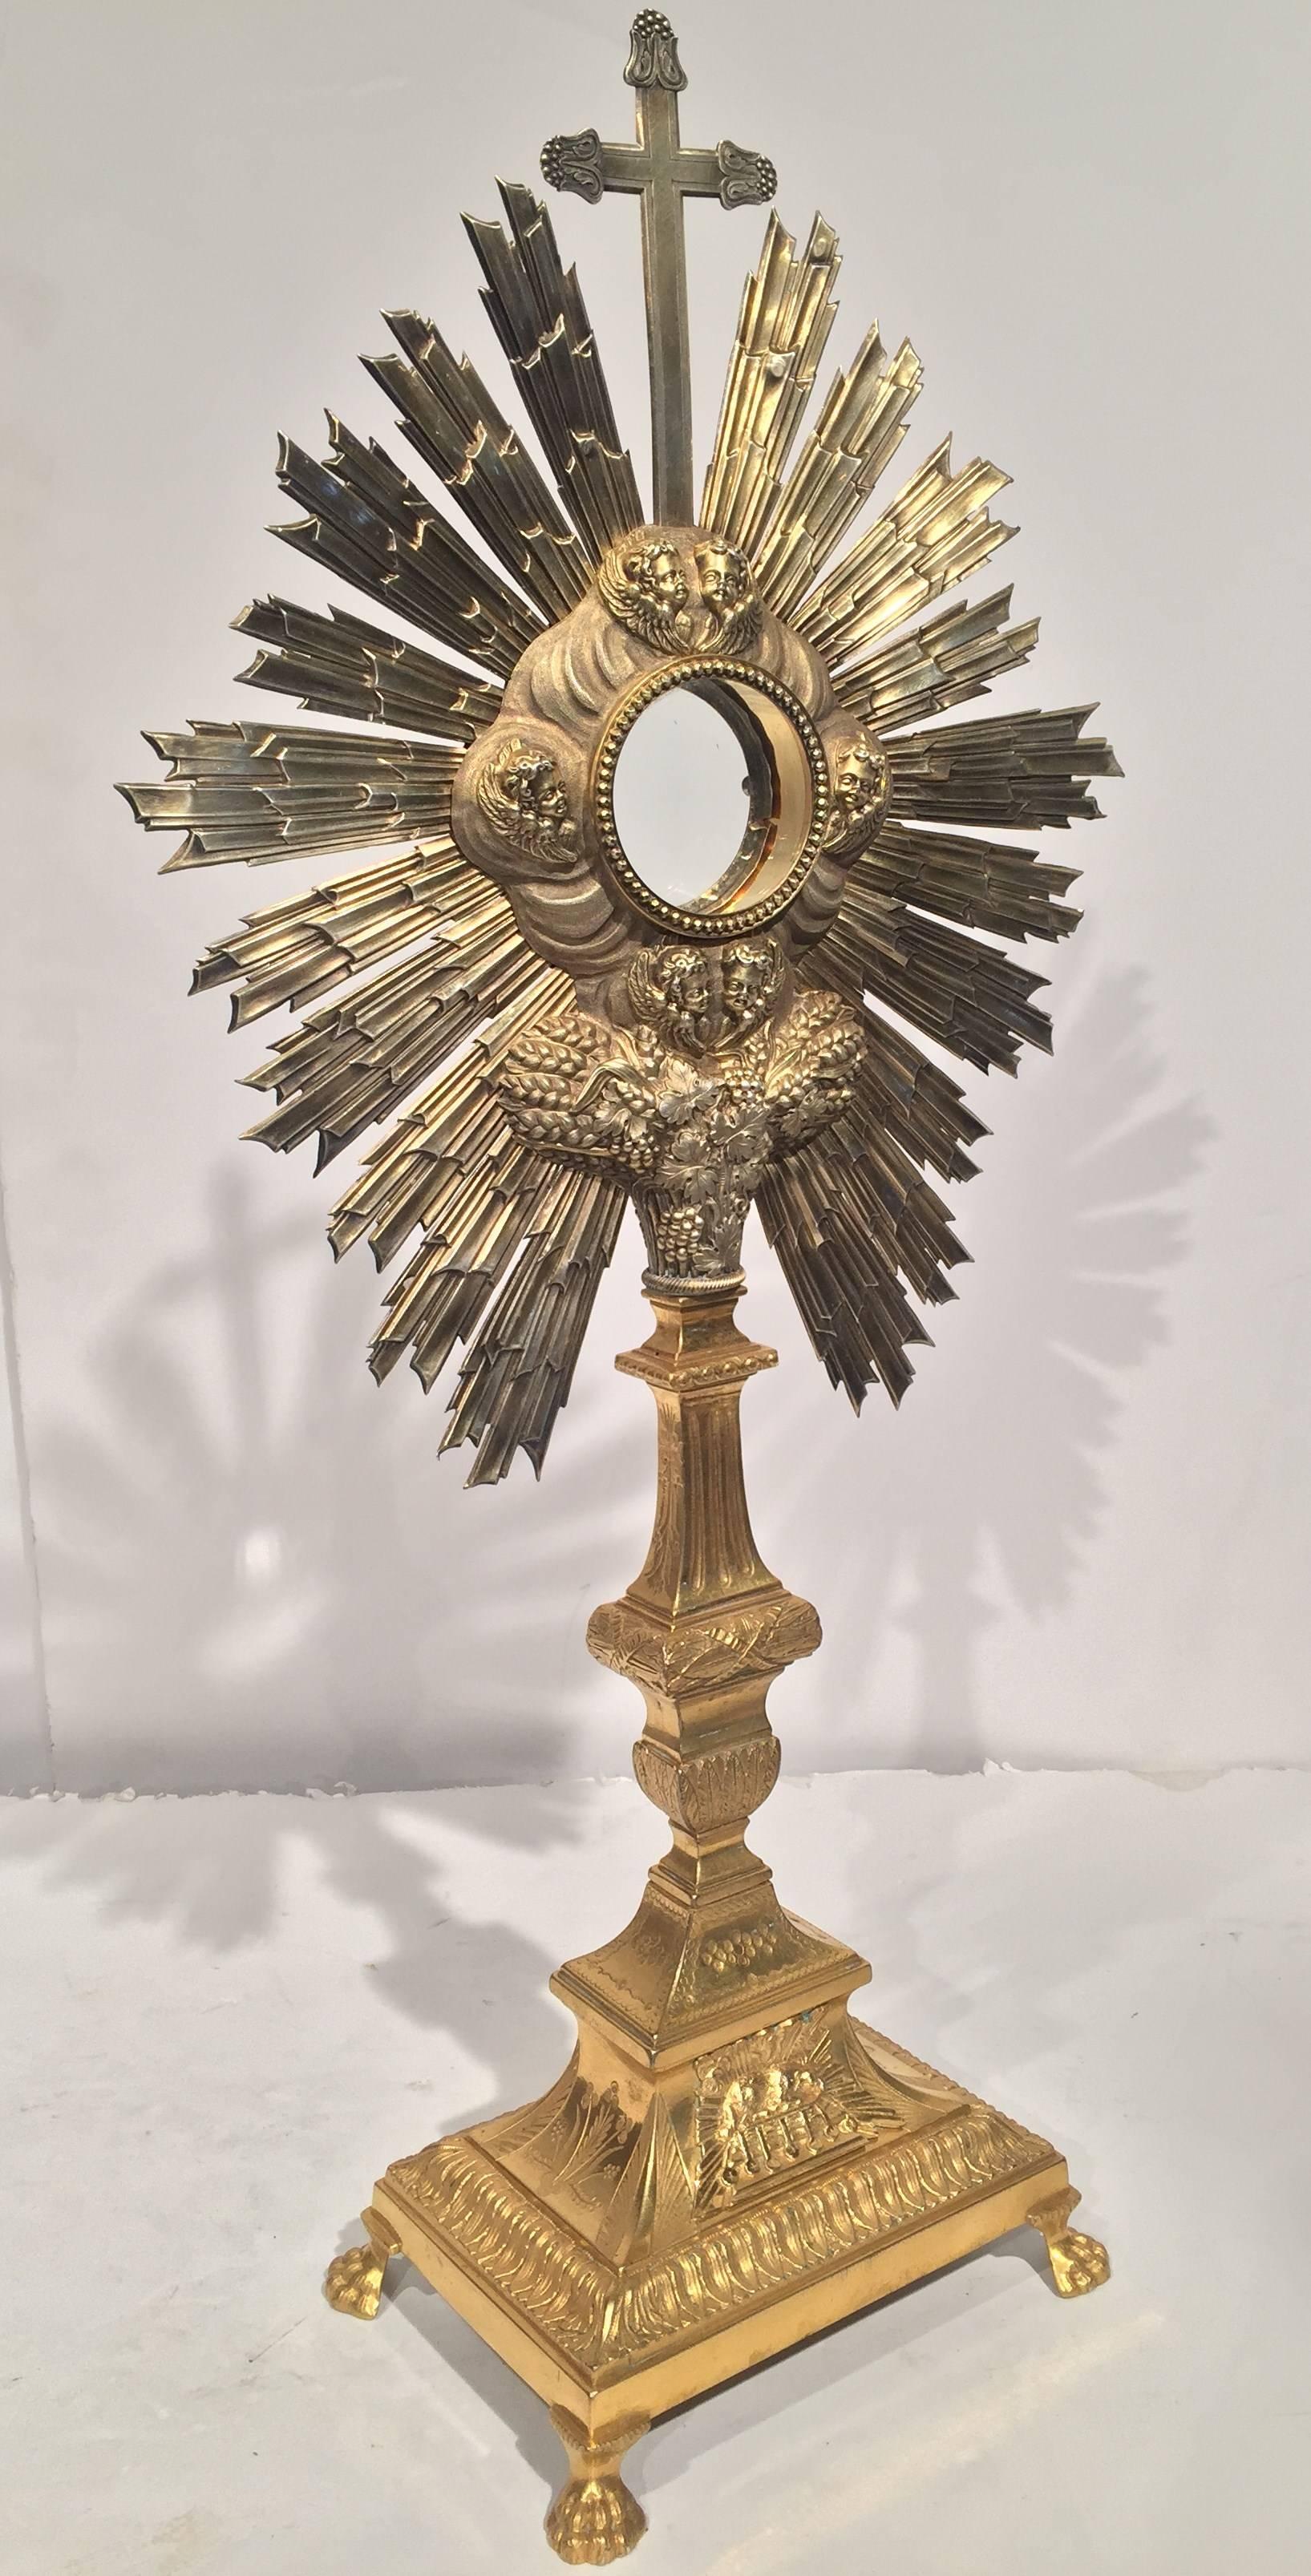 Very fine 18th century French bronze and copper catholic ostensoir (monstrance) (circa: 1780), depicting from top to bottom: the cross, the sun, 6 angels, wheat, vines, grapes and lamb.
A ostensoir or 